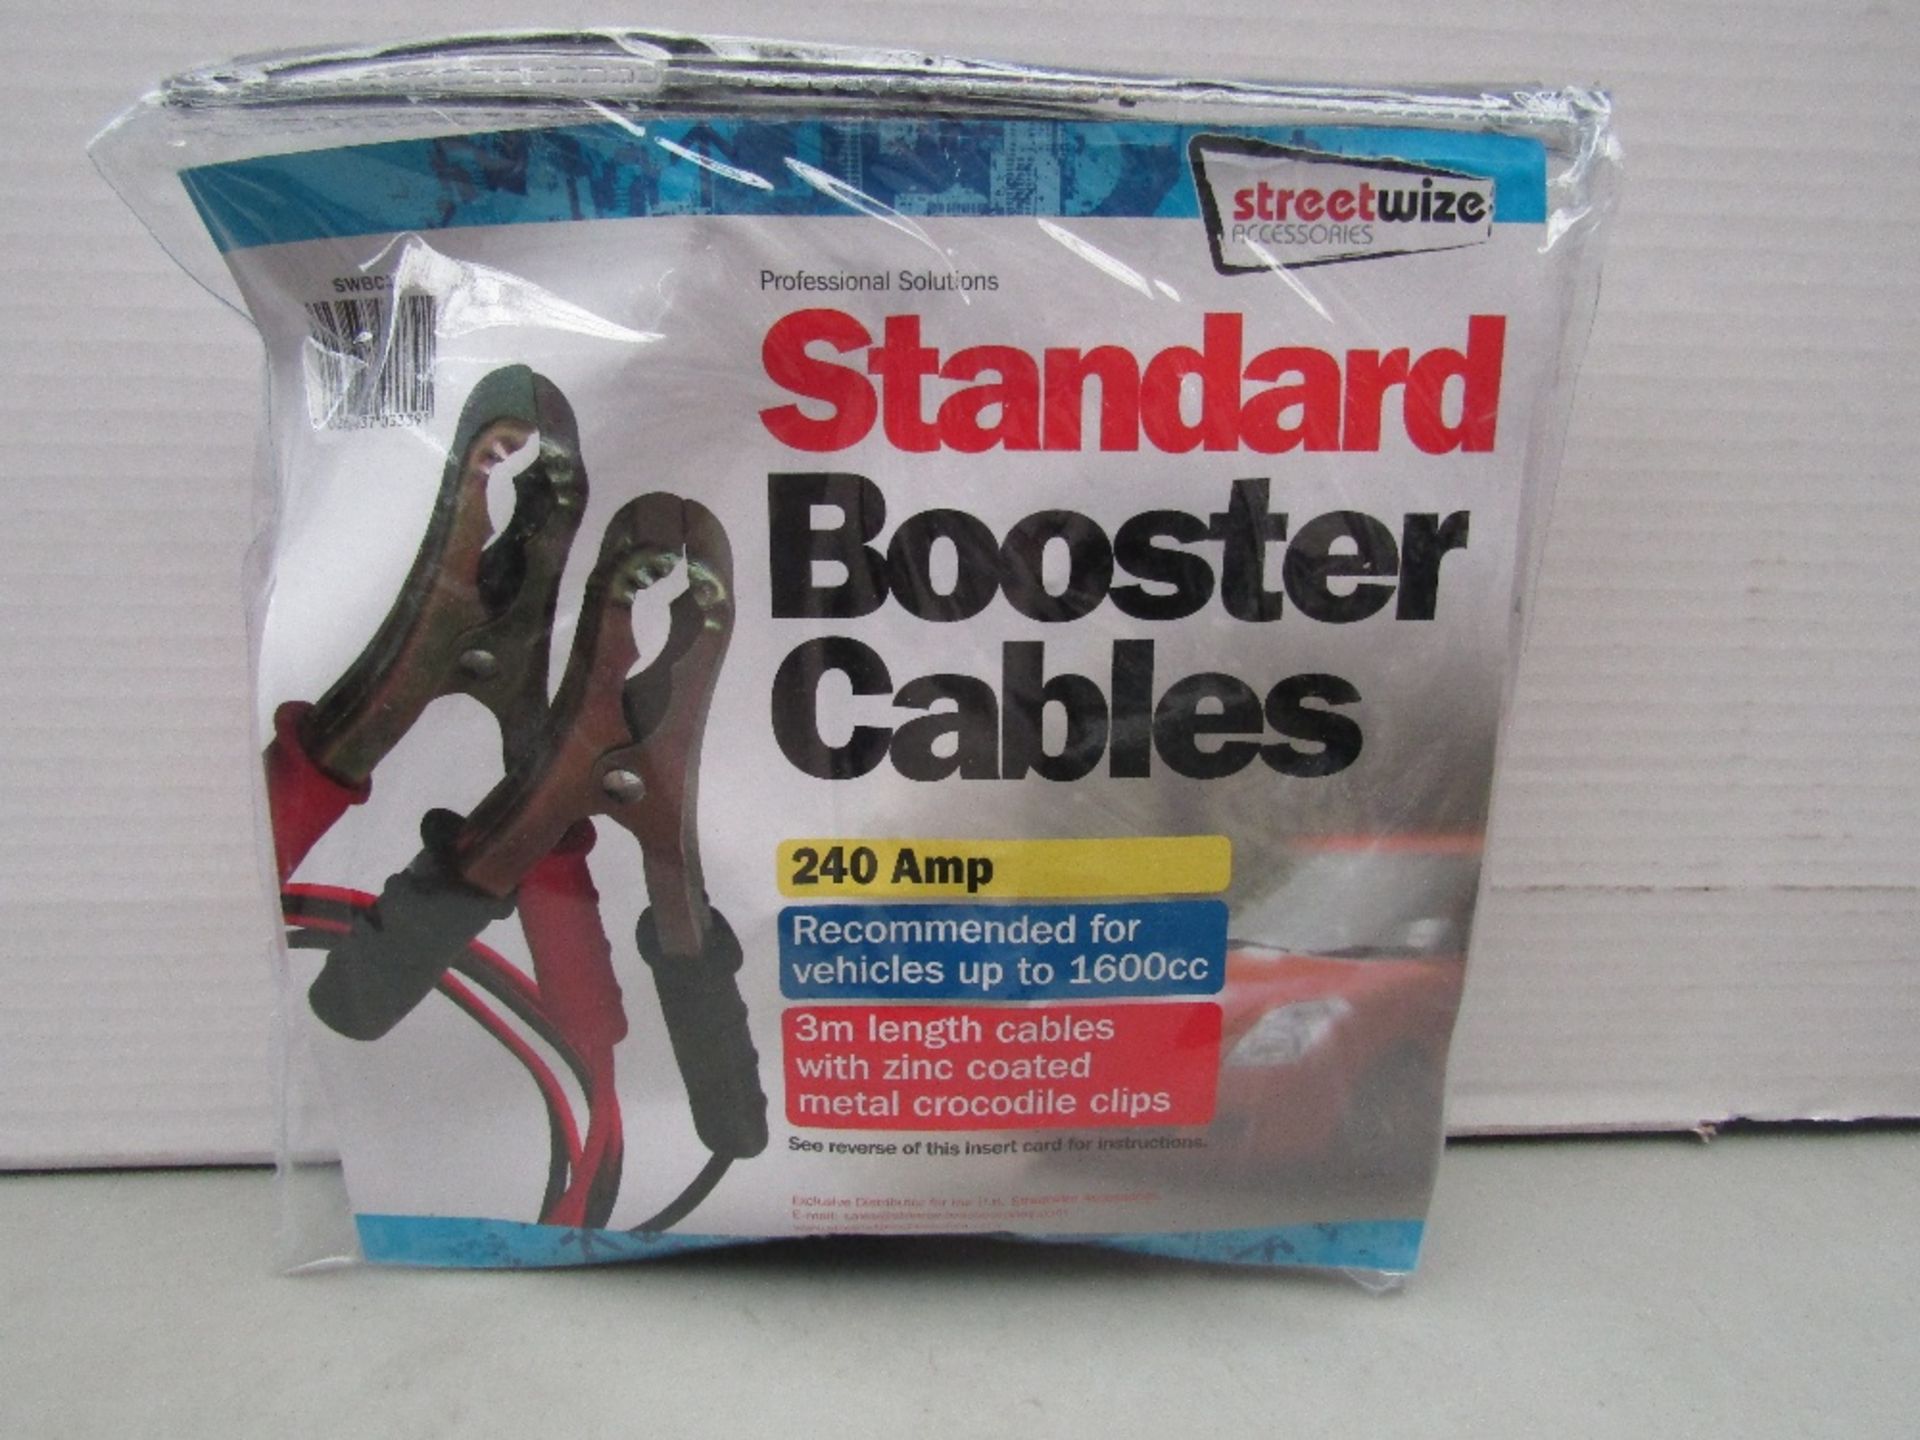 StreetWize 240Amp Standard Booster Cables. New, in original packaging.